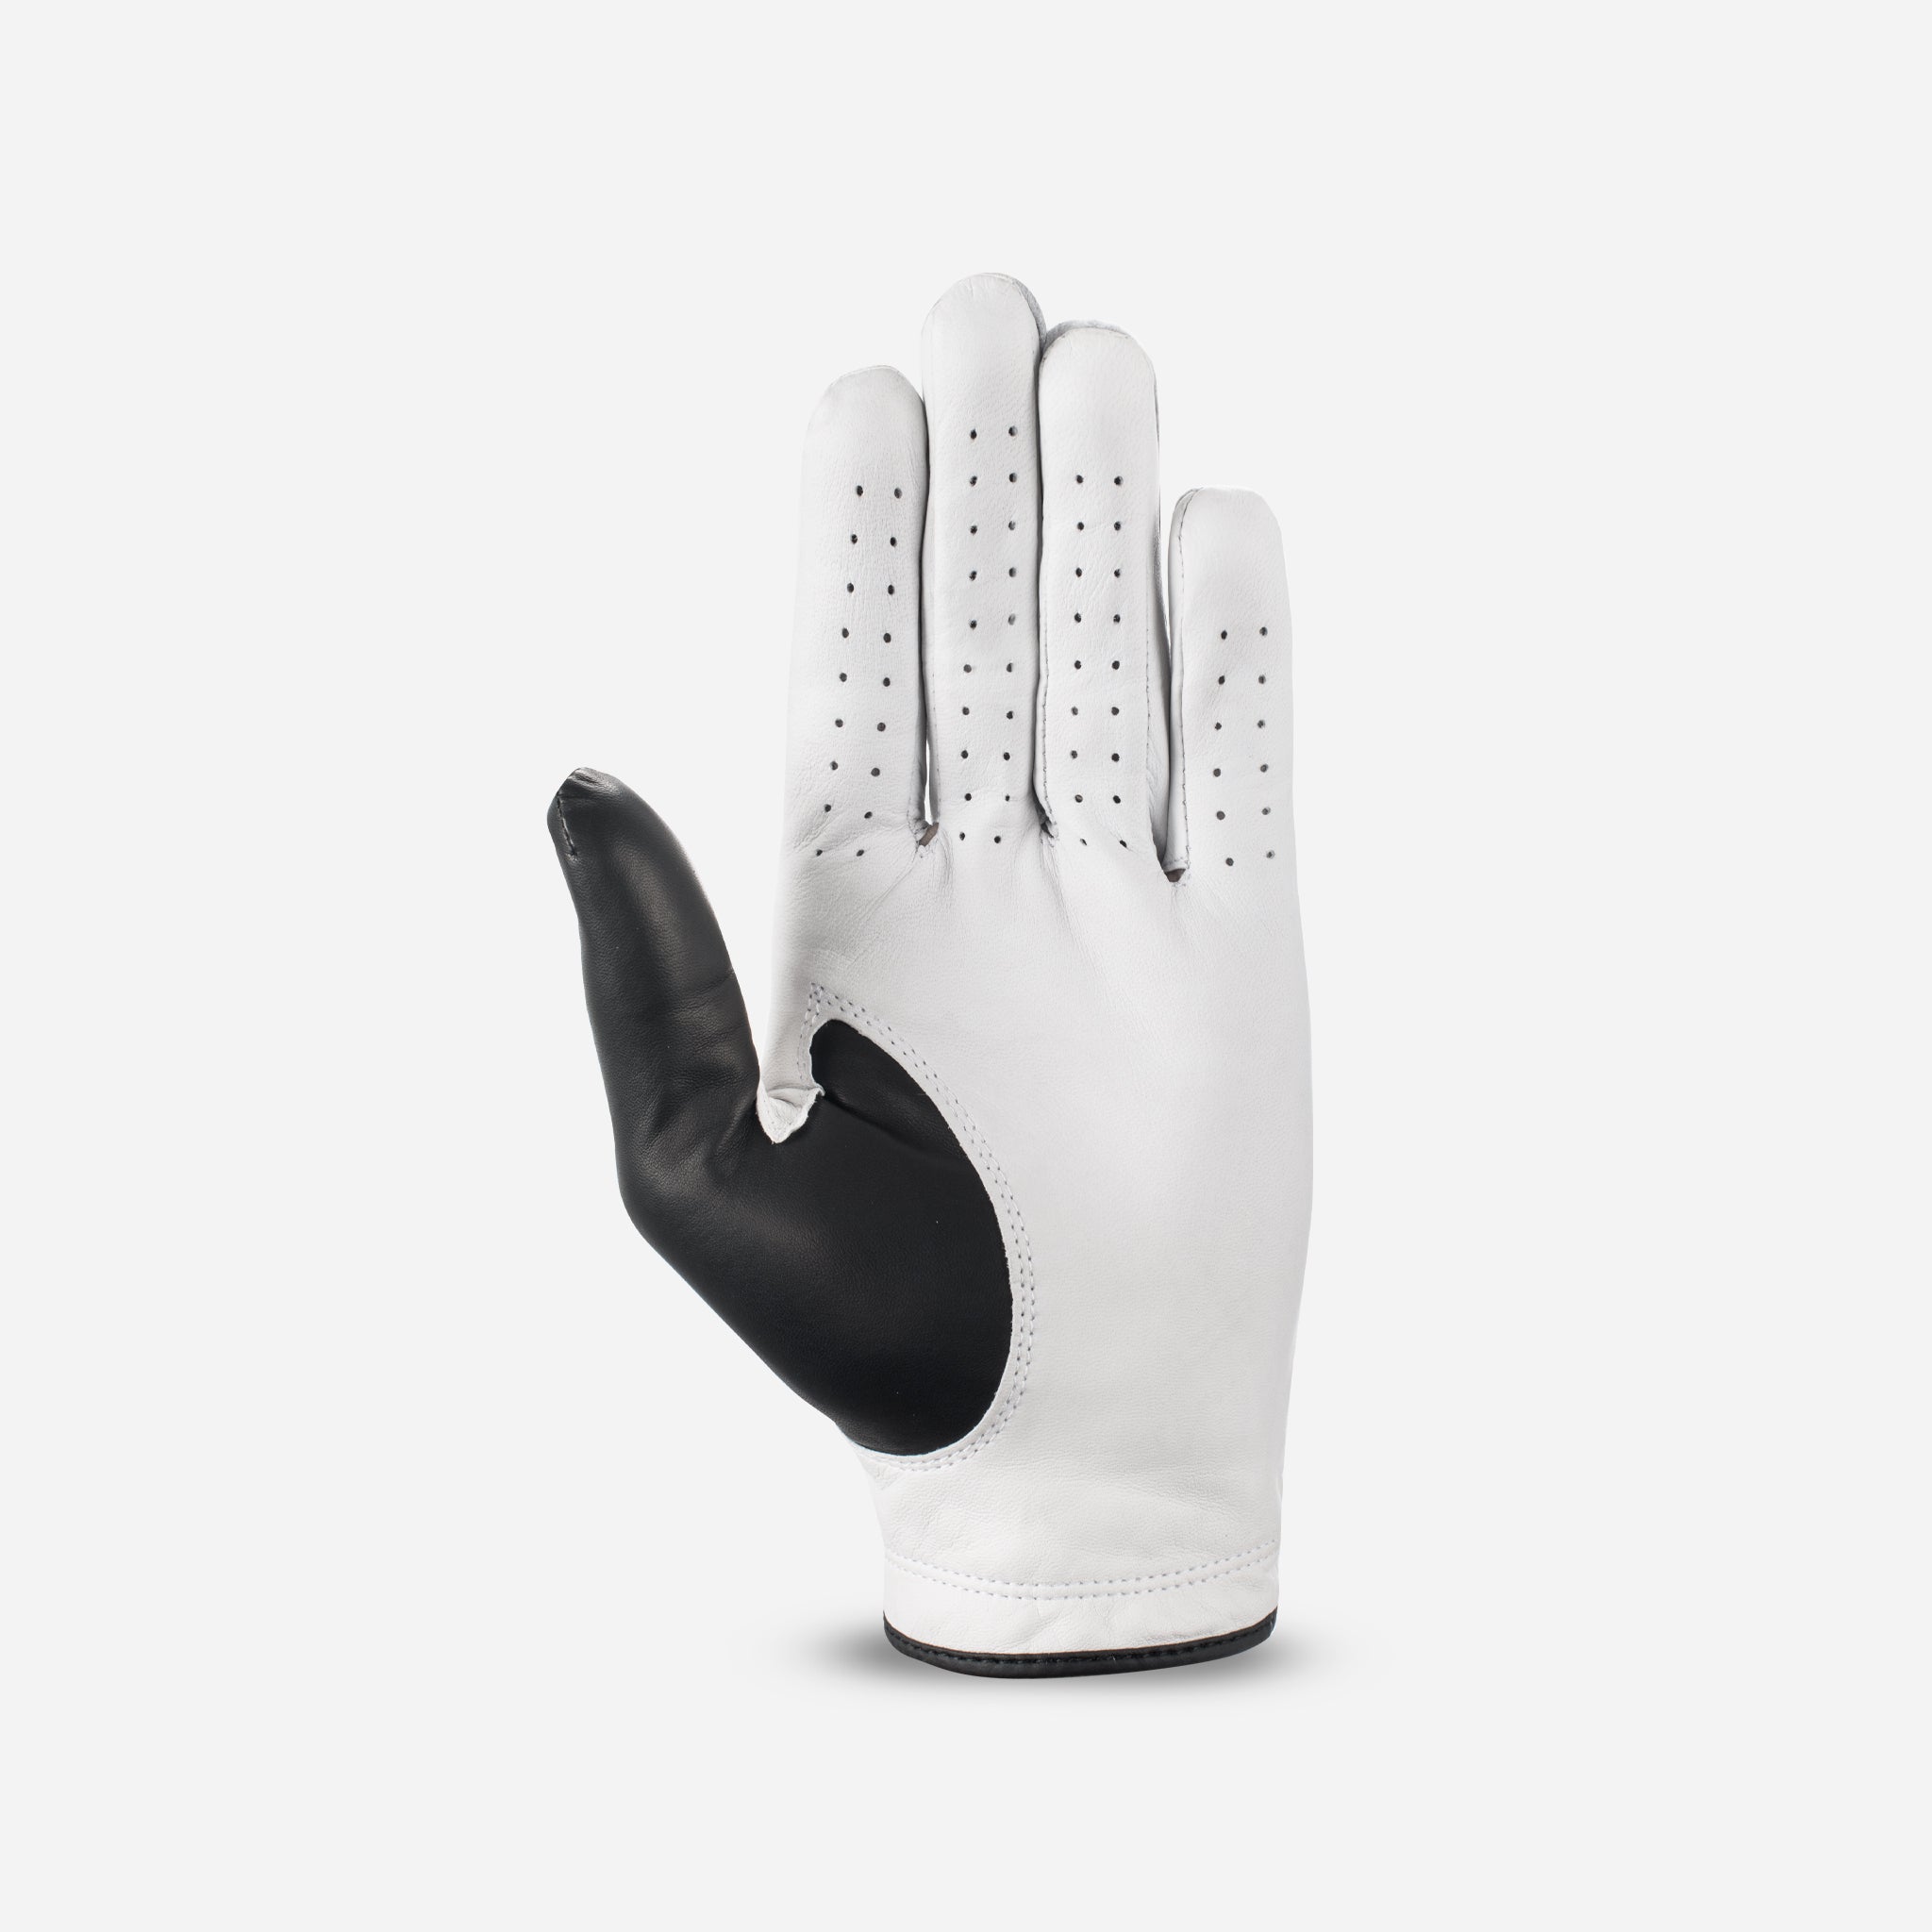 Vessel x G/FORE Glove